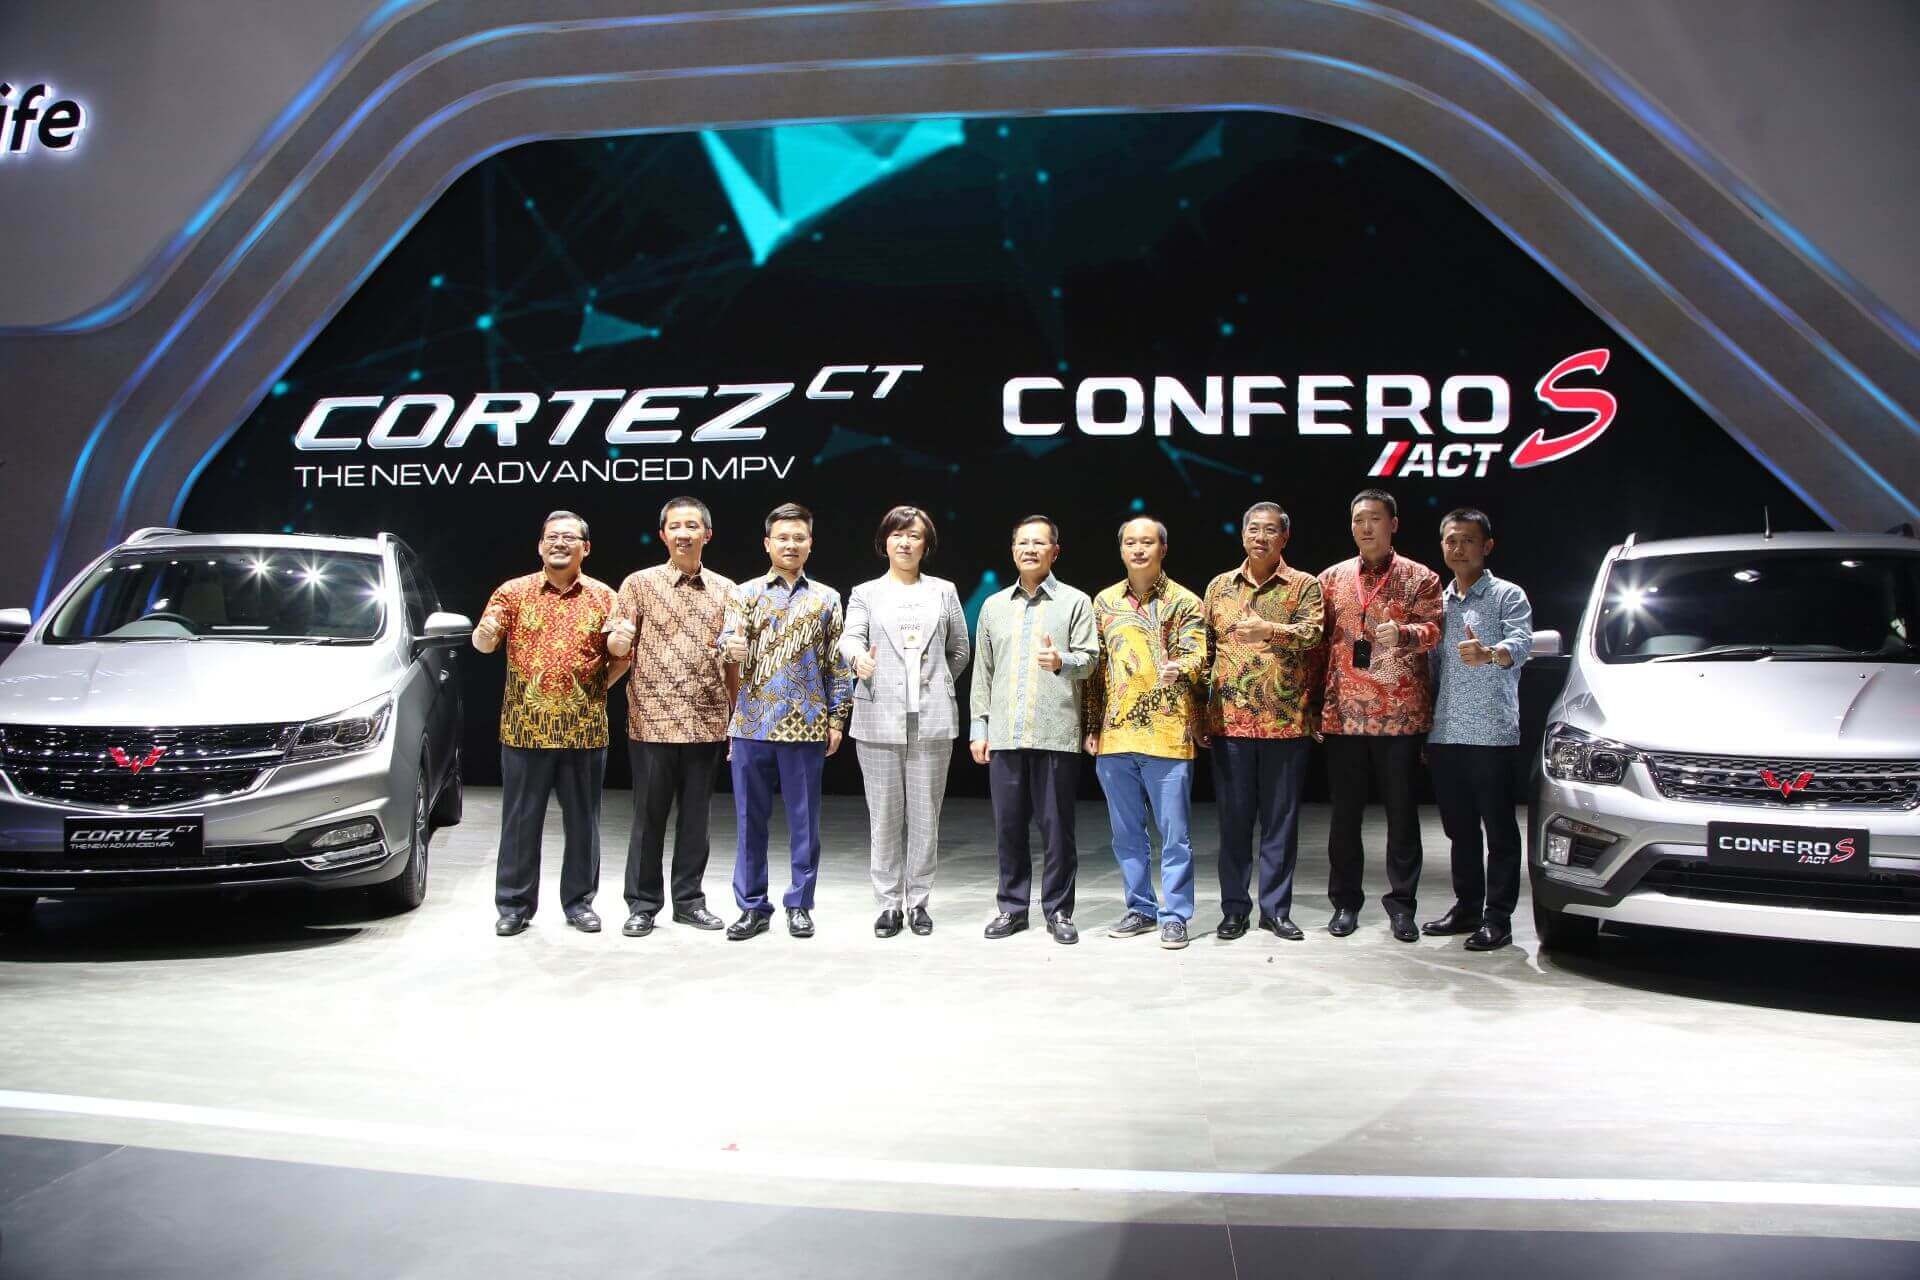 Image Wuling Cortez CT and ACT Confero S Officially Launched in Indonesia